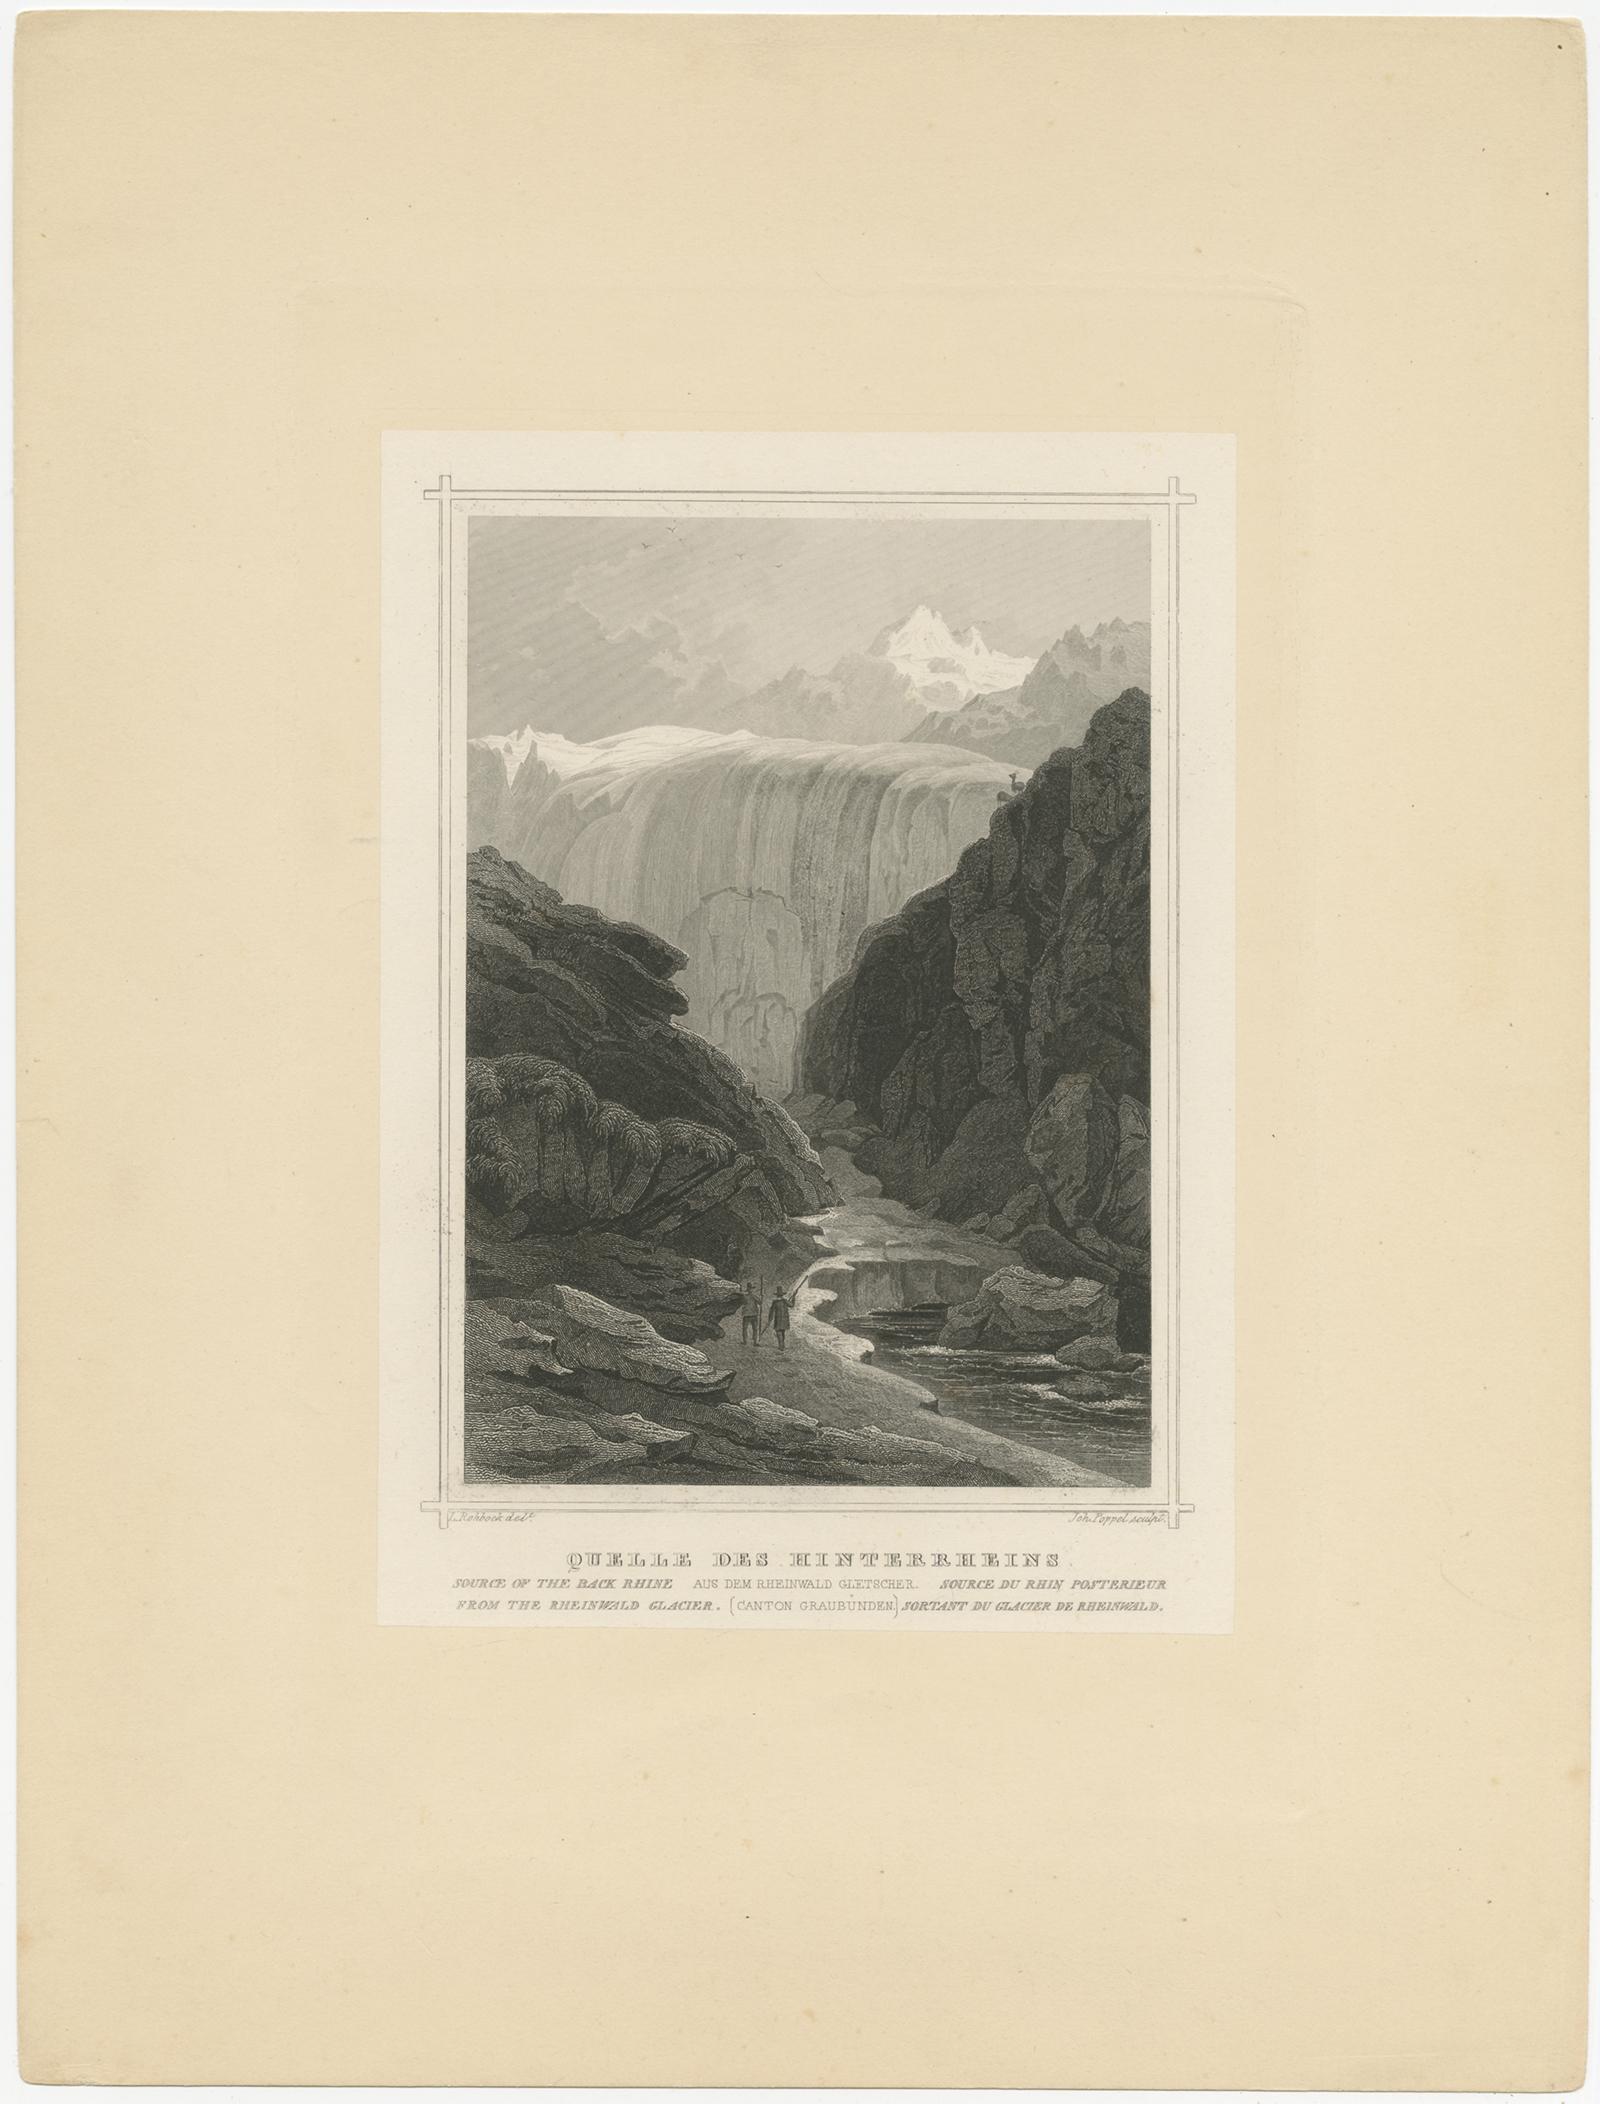 Antique print titled 'Quelle des Hinterrheins'. Lithograph on chine collé of the source of the Back Rhine from the Rheinwald Glacier, Canton Graubünden. Engraved by J. Poppel after L. Rohbock. Published circa 1860.